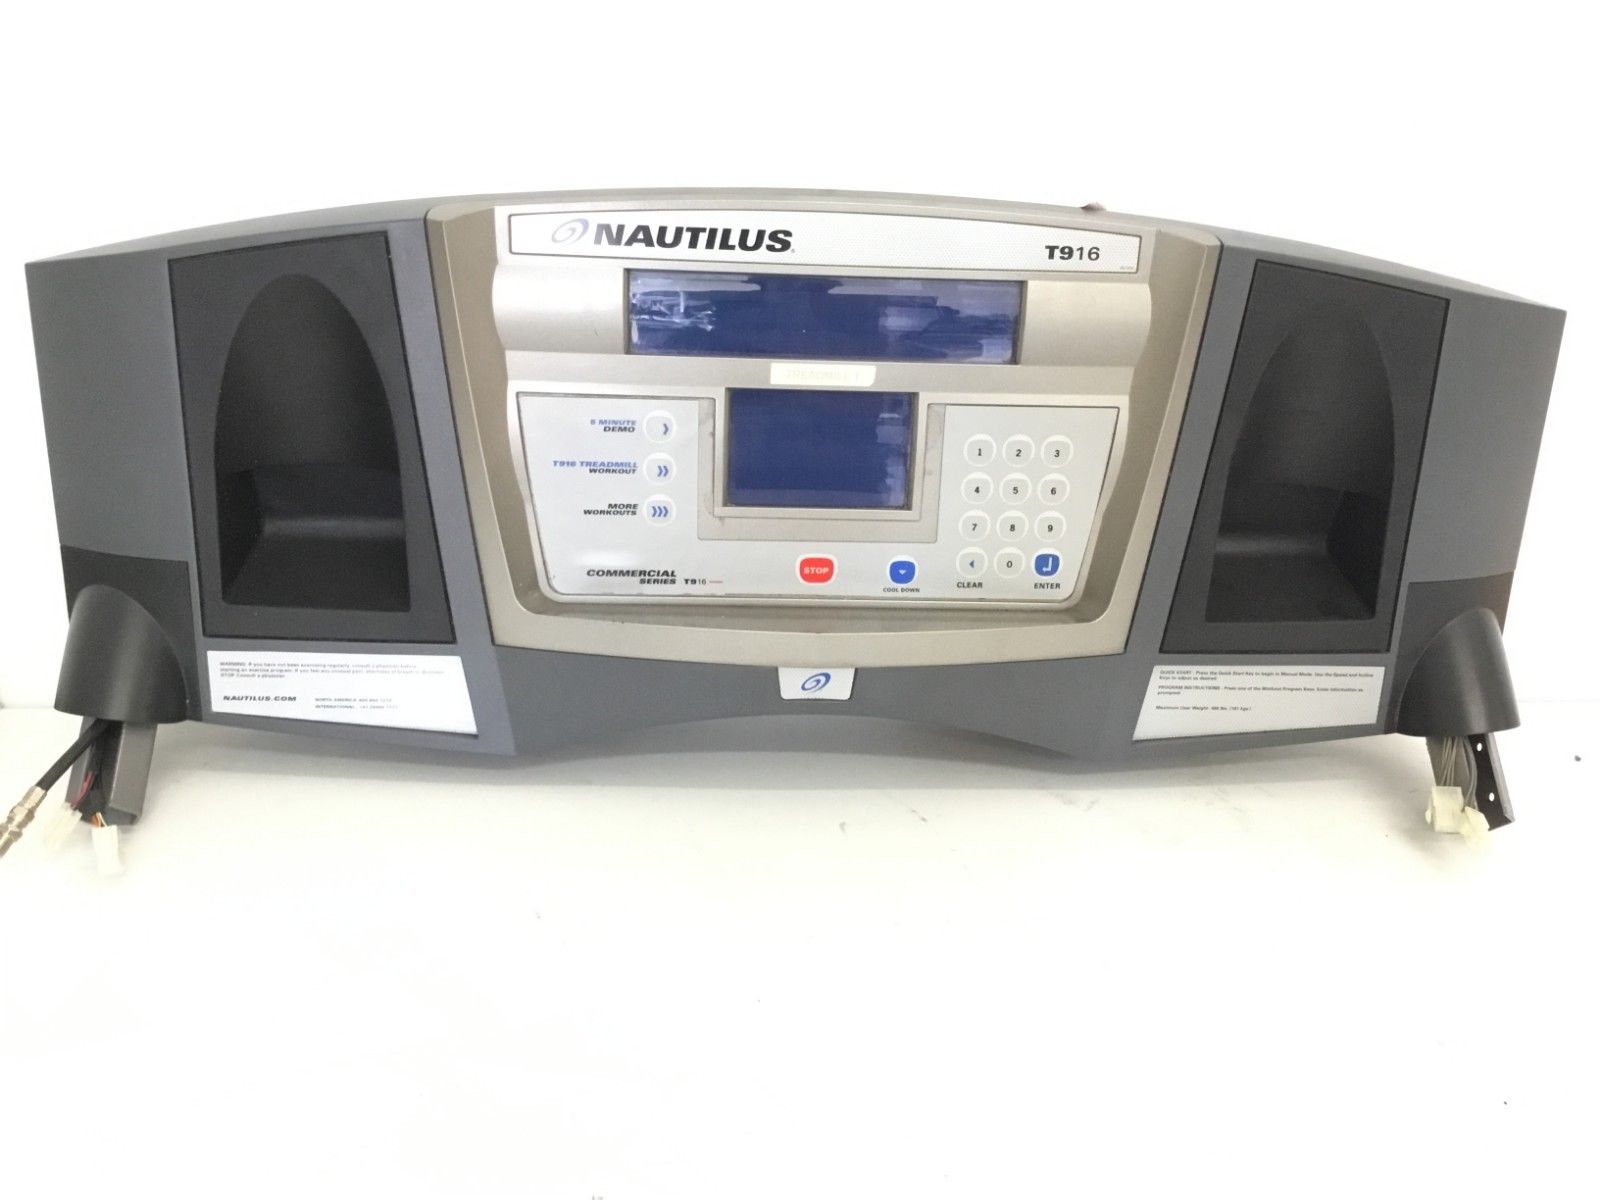 Nautilus T916 Commercial Treadmill Display Console (Used)